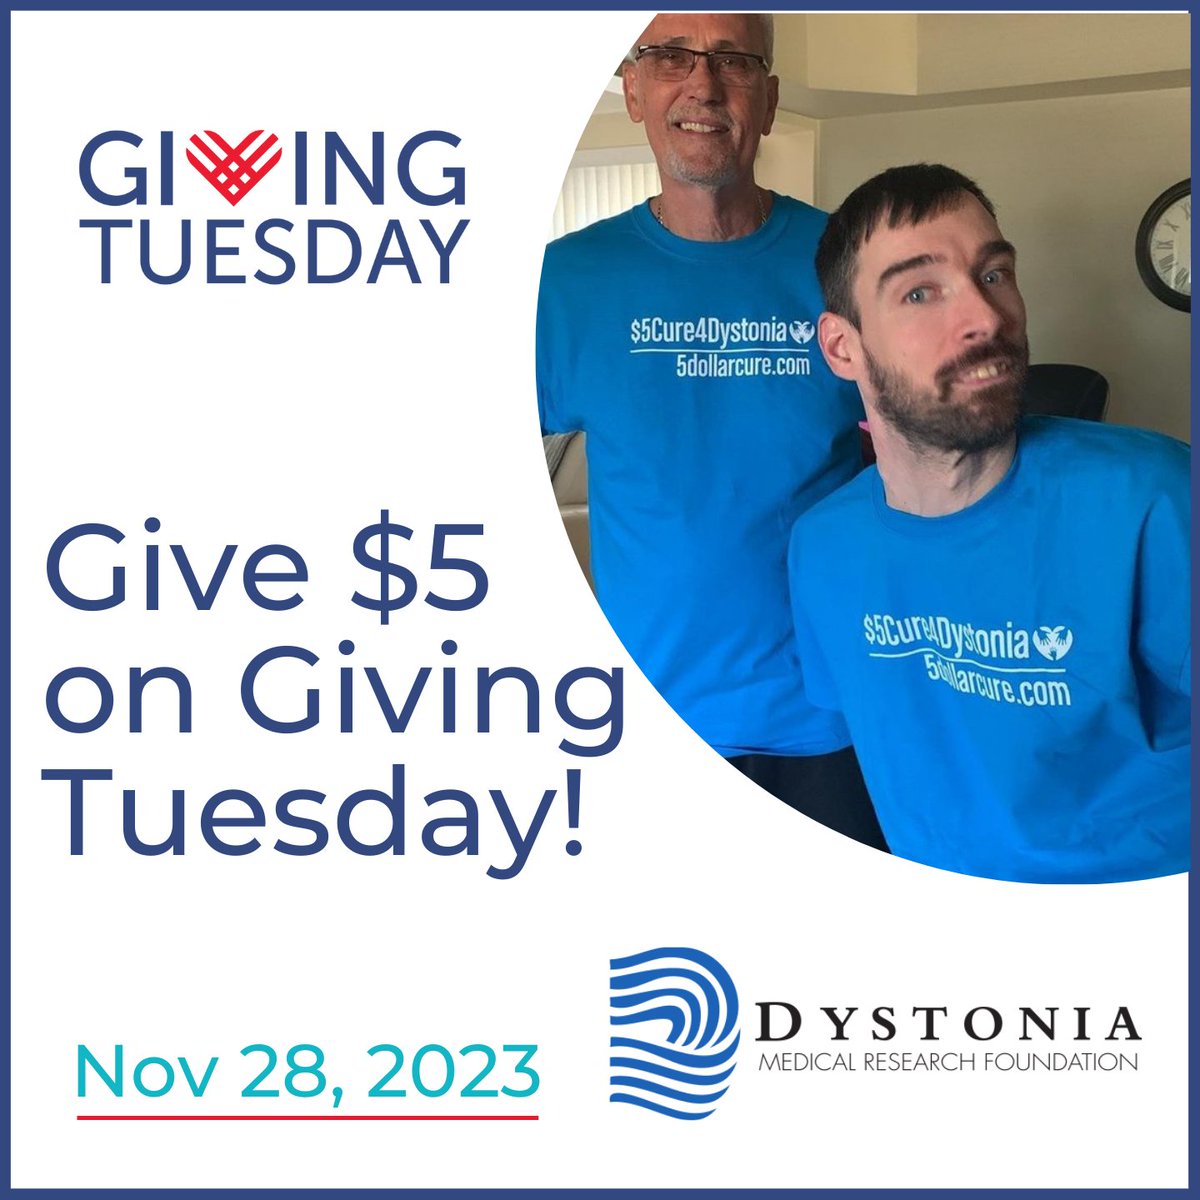 Give🖐️On Giving Tuesday. Help DMRF raise money and awareness $5 at a time. All funds raised today will be eligible to be matched by an anonymous donor. bit.ly/3Ra8YeZ Mike Delise (left) and Jason Dunn (right) launched $5DollarCure4Dystonia in 2017. #5dollarcure4dystonia